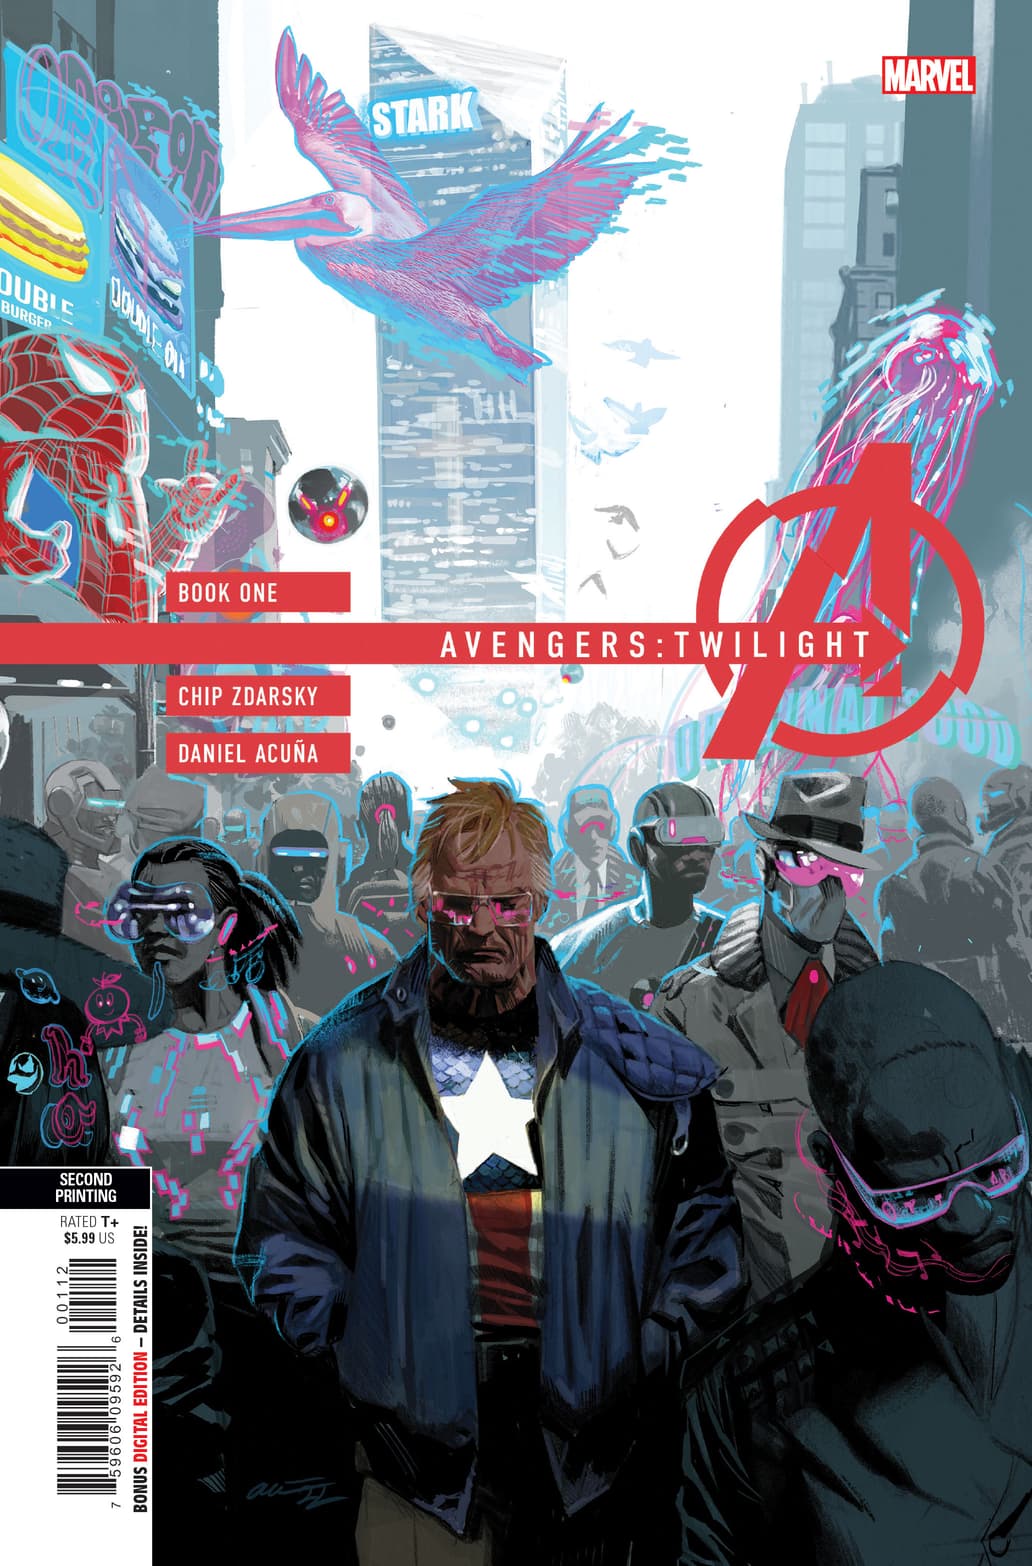 AVENGERS: TWILIGHT #1 Second Printing Variant Cover by Daniel Acuña